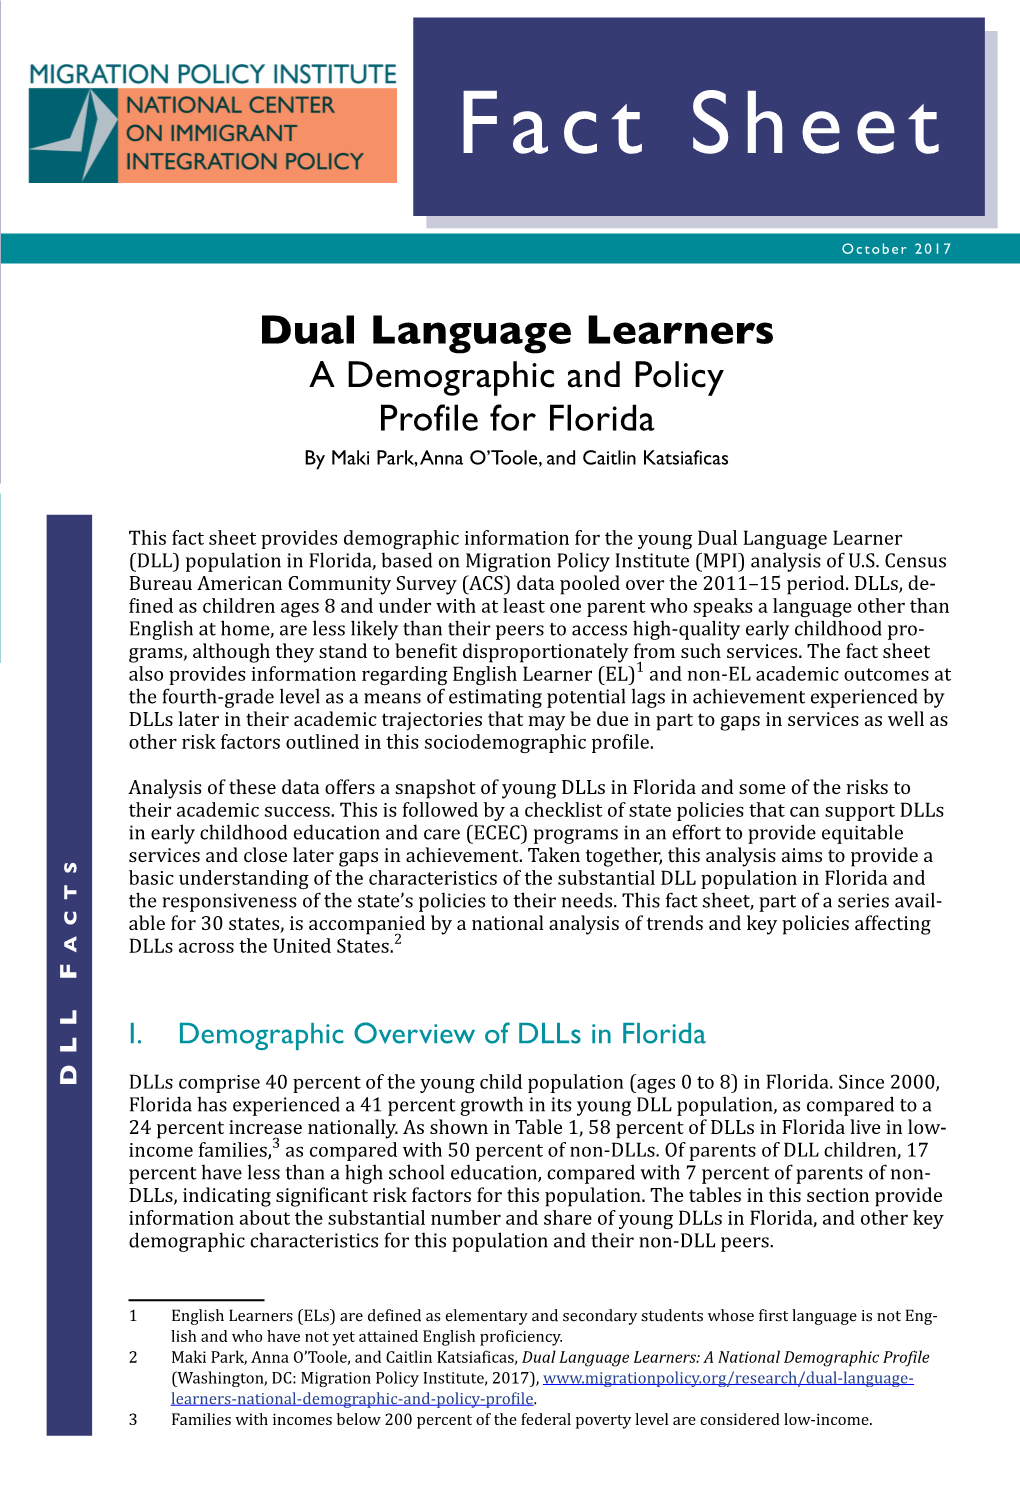 Dual Language Learners: a Demographic and Policy Profile for Florida Fact Sheet